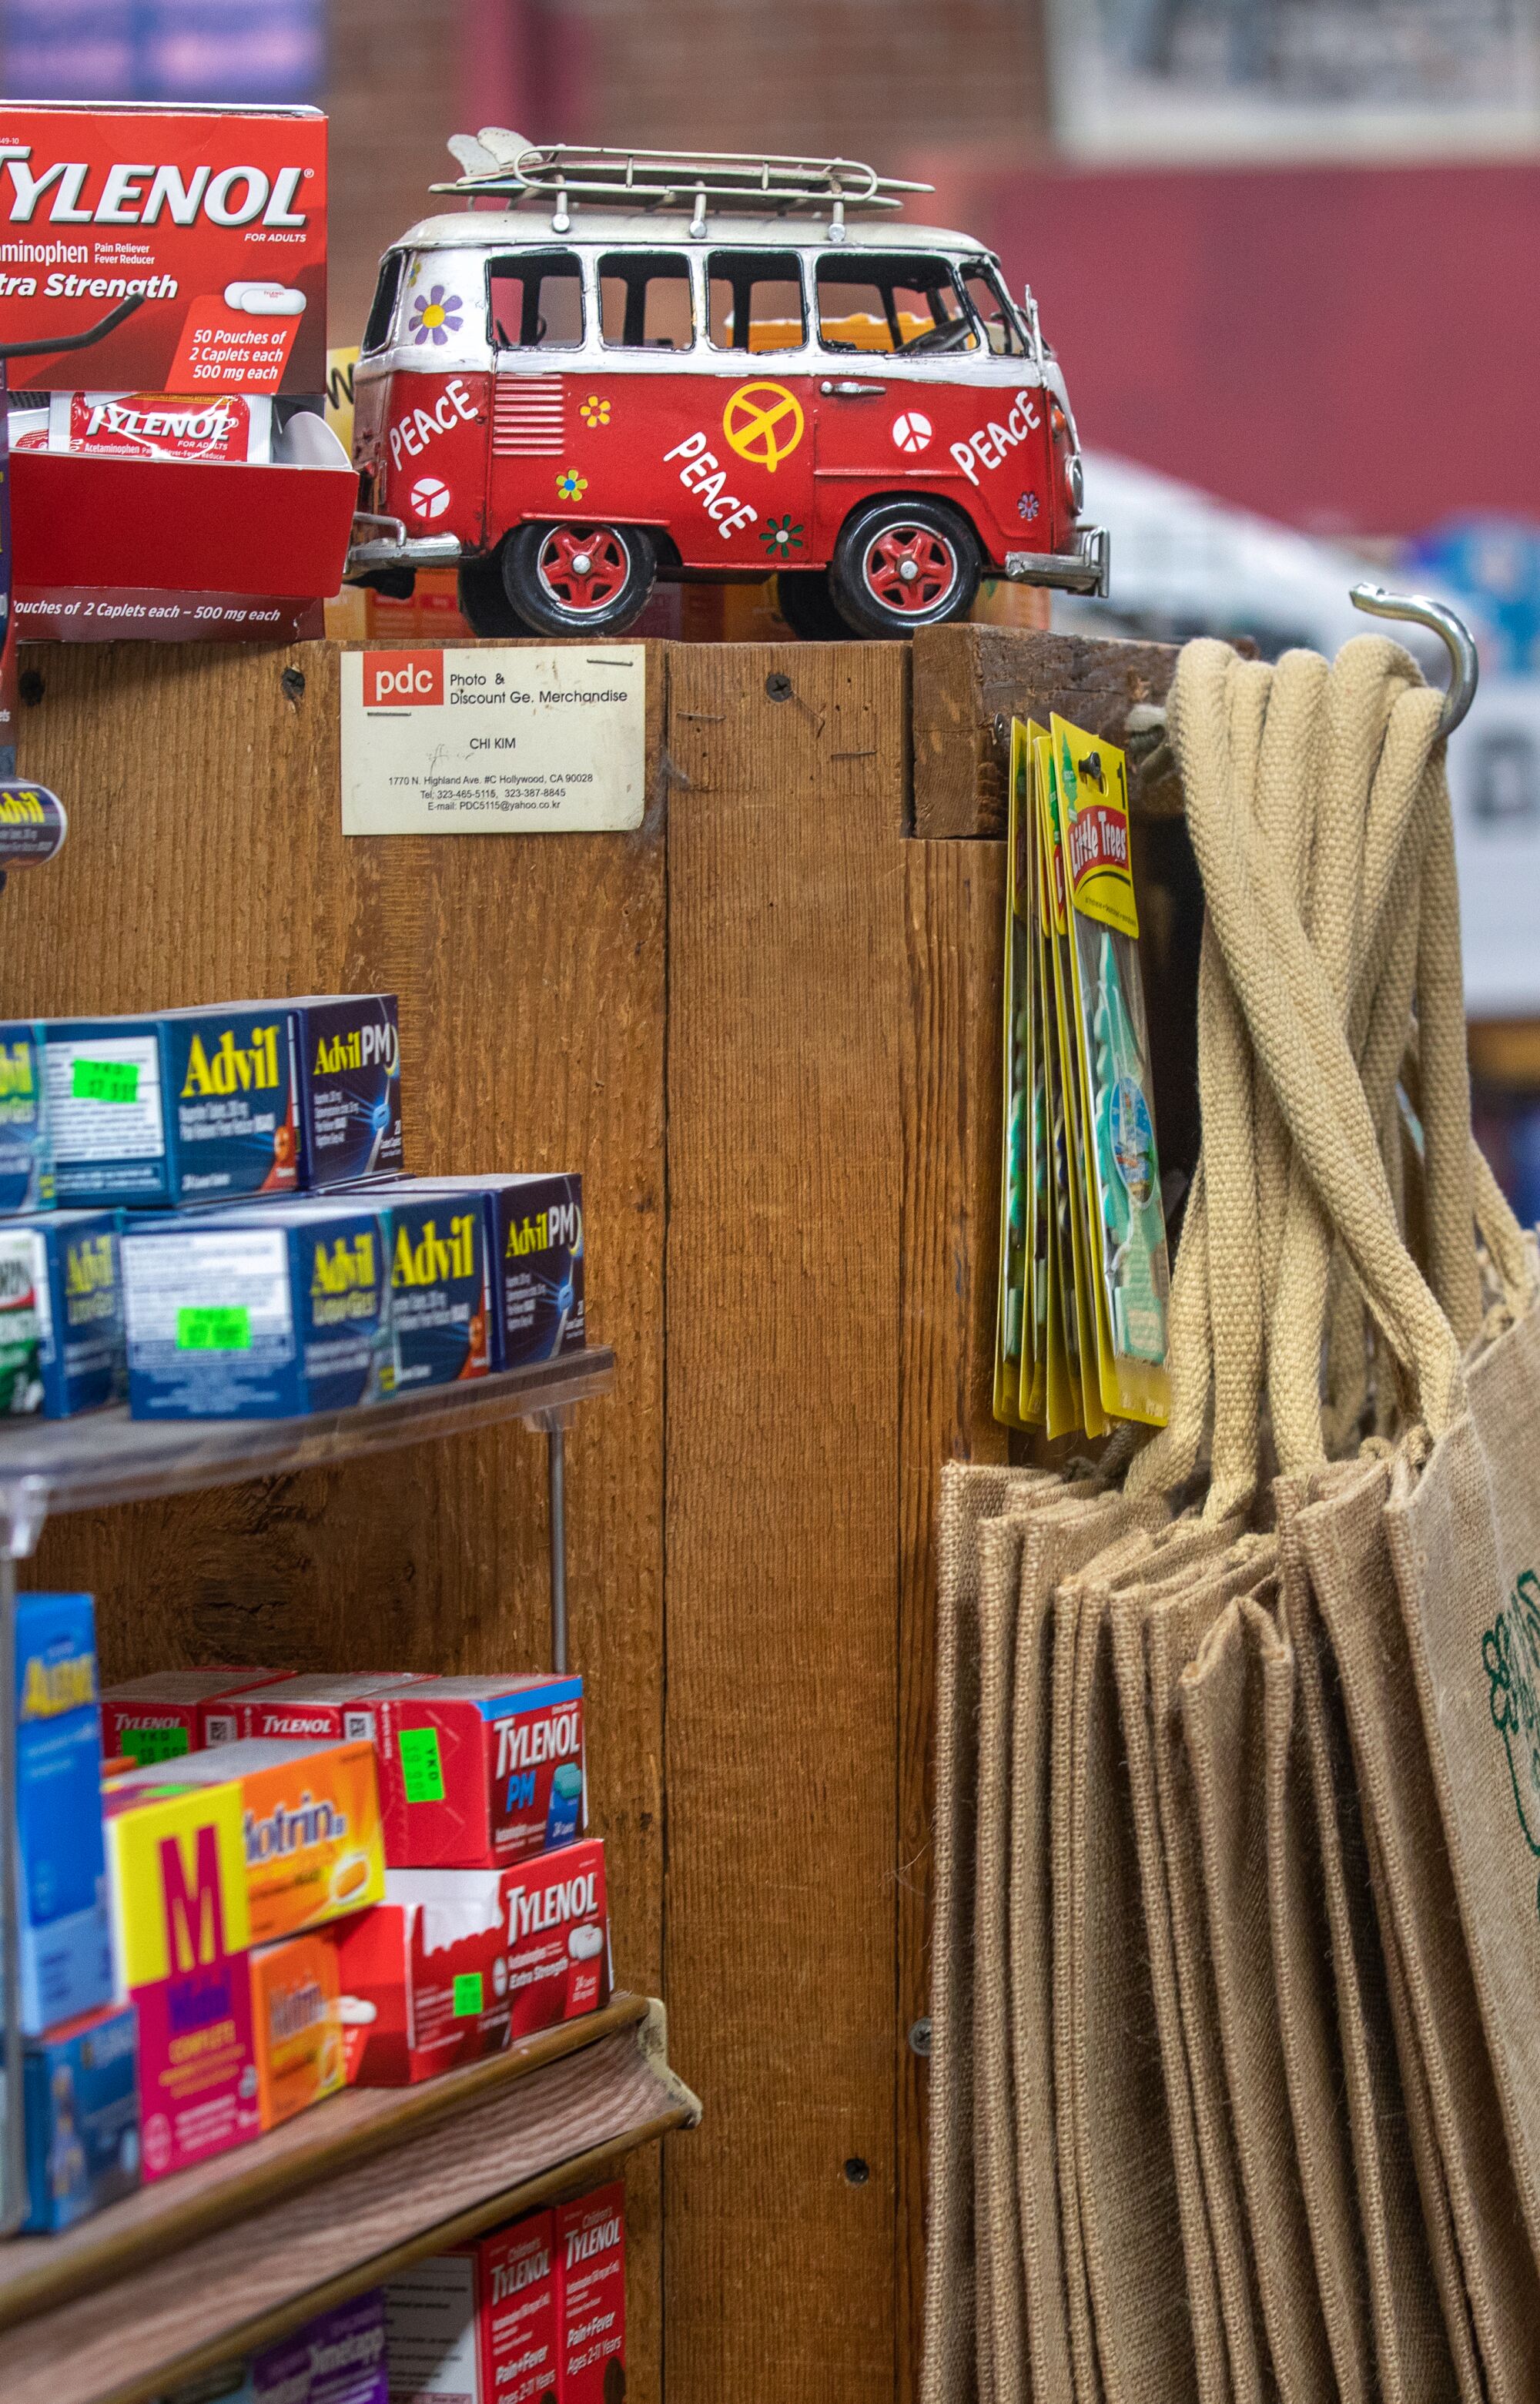 A miniature red van, reminiscent of those from the 1960s, is tucked between medication and tote bags.